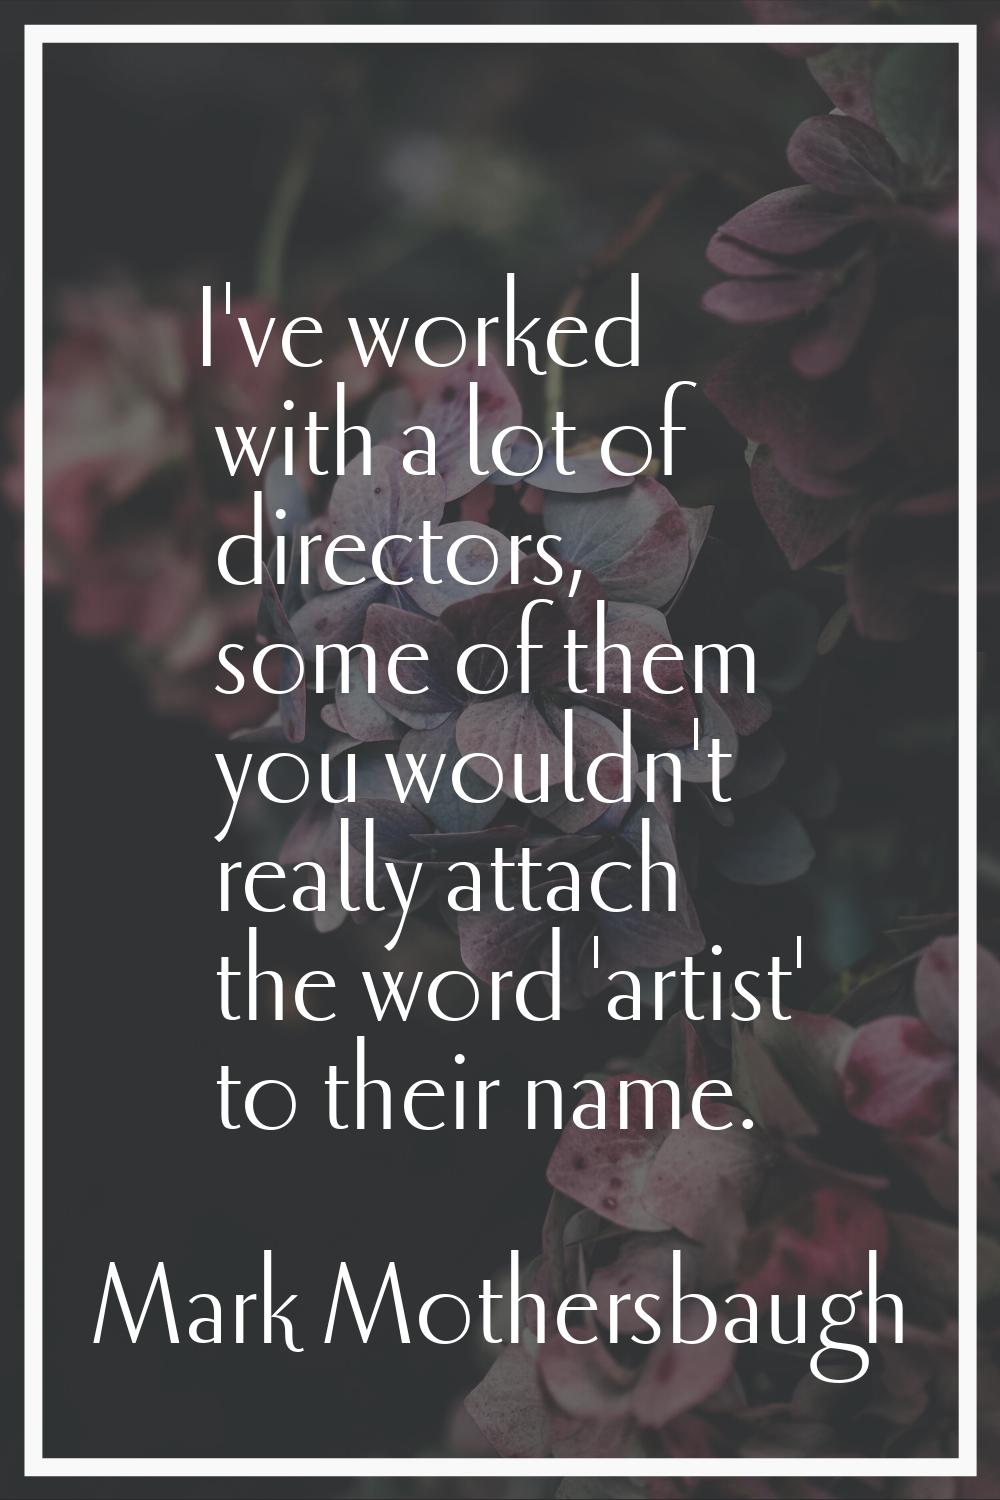 I've worked with a lot of directors, some of them you wouldn't really attach the word 'artist' to t